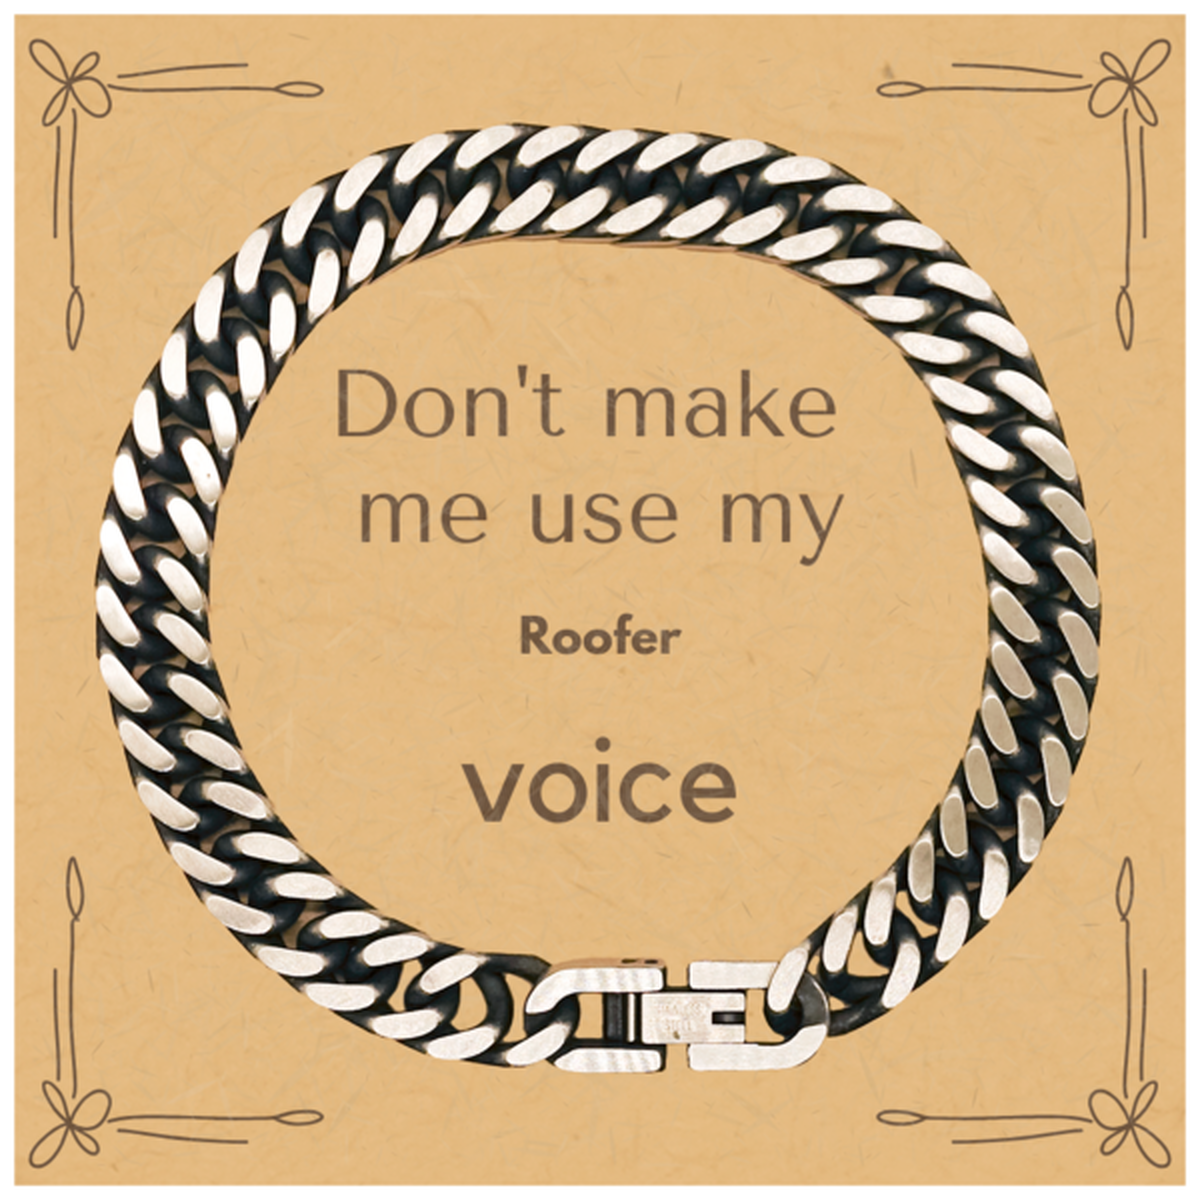 Don't make me use my Roofer voice, Sarcasm Roofer Card Gifts, Christmas Roofer Cuban Link Chain Bracelet Birthday Unique Gifts For Roofer Coworkers, Men, Women, Colleague, Friends